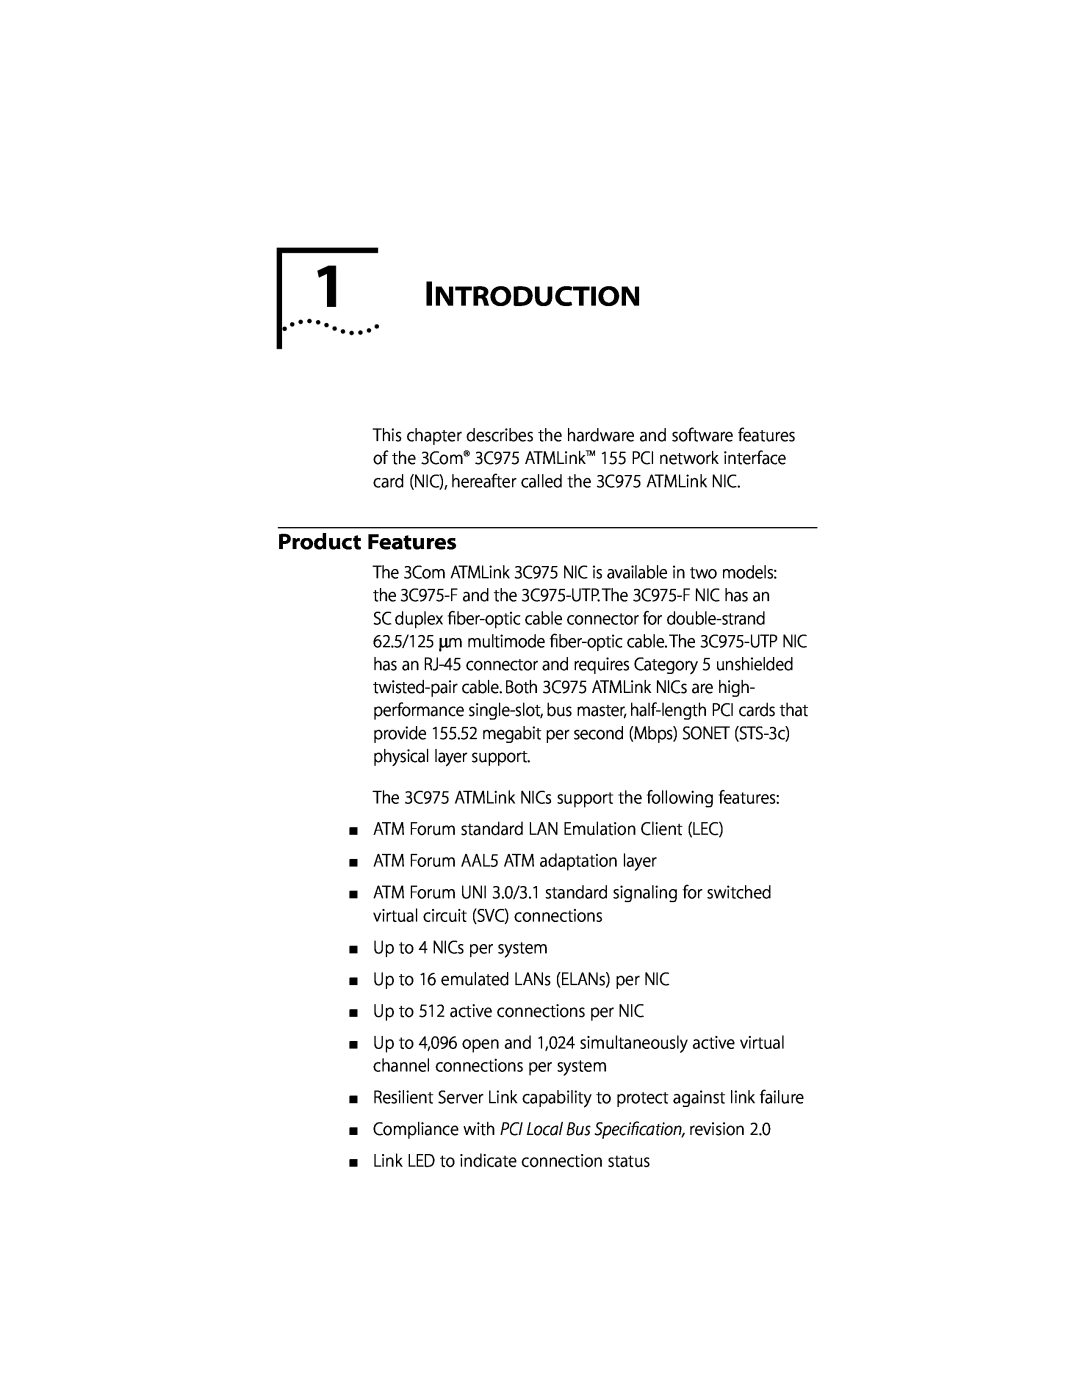 3Com 155 PCI manual Introduction, Product Features 